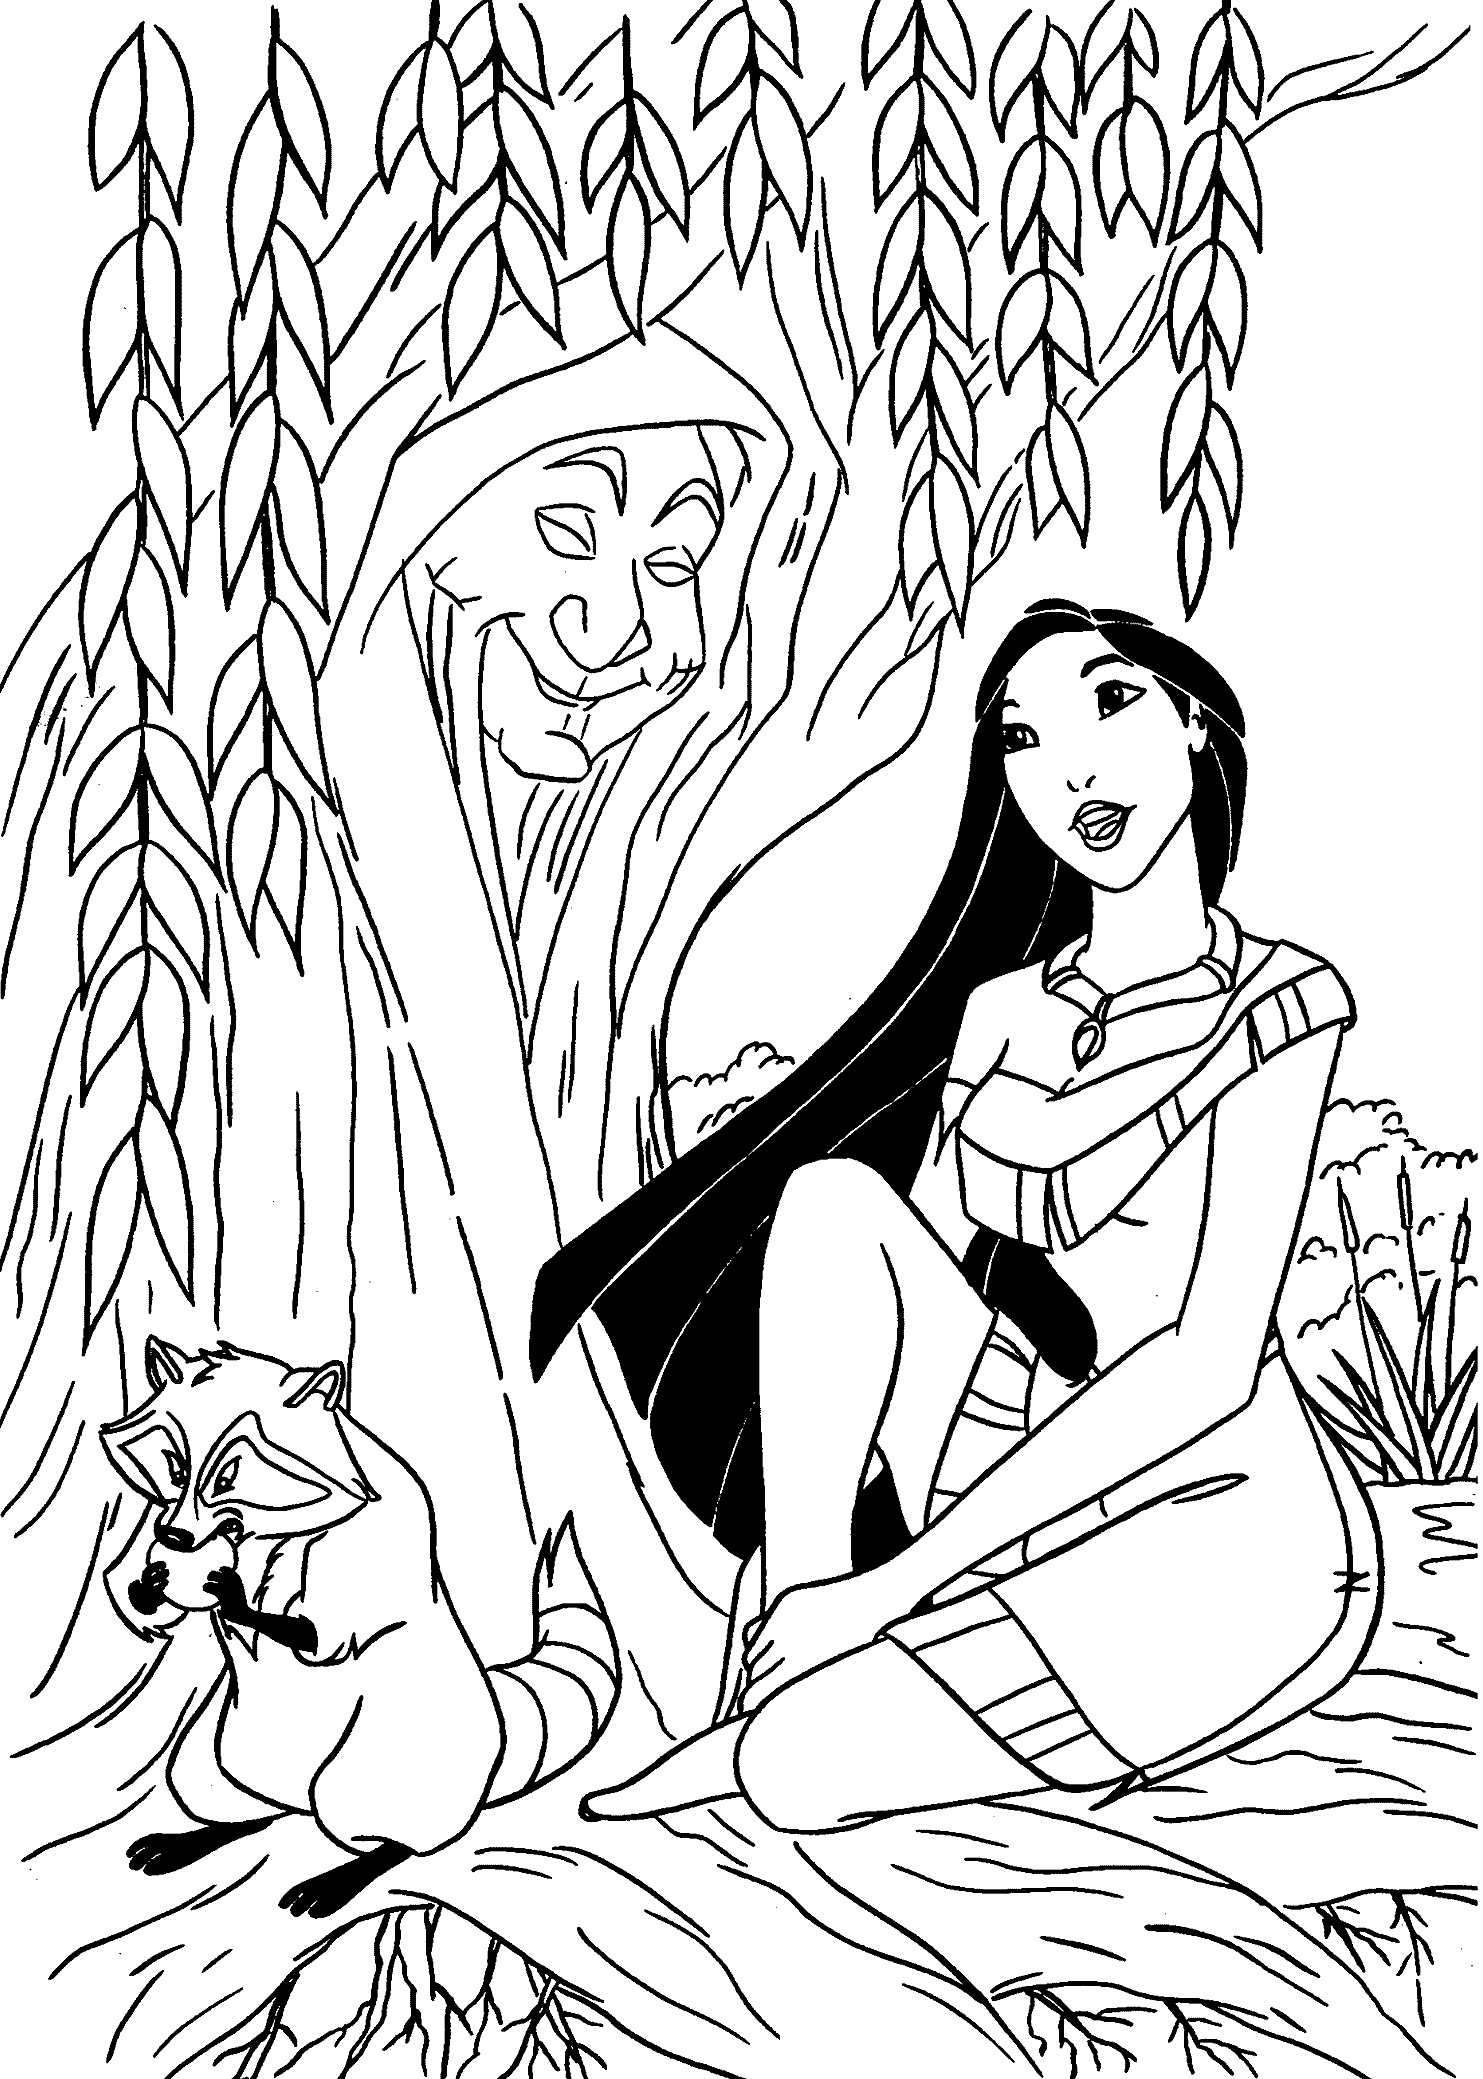 Pocahontas And Grandmother Willow Coloring Page - Free Printable Coloring  Pages for Kids